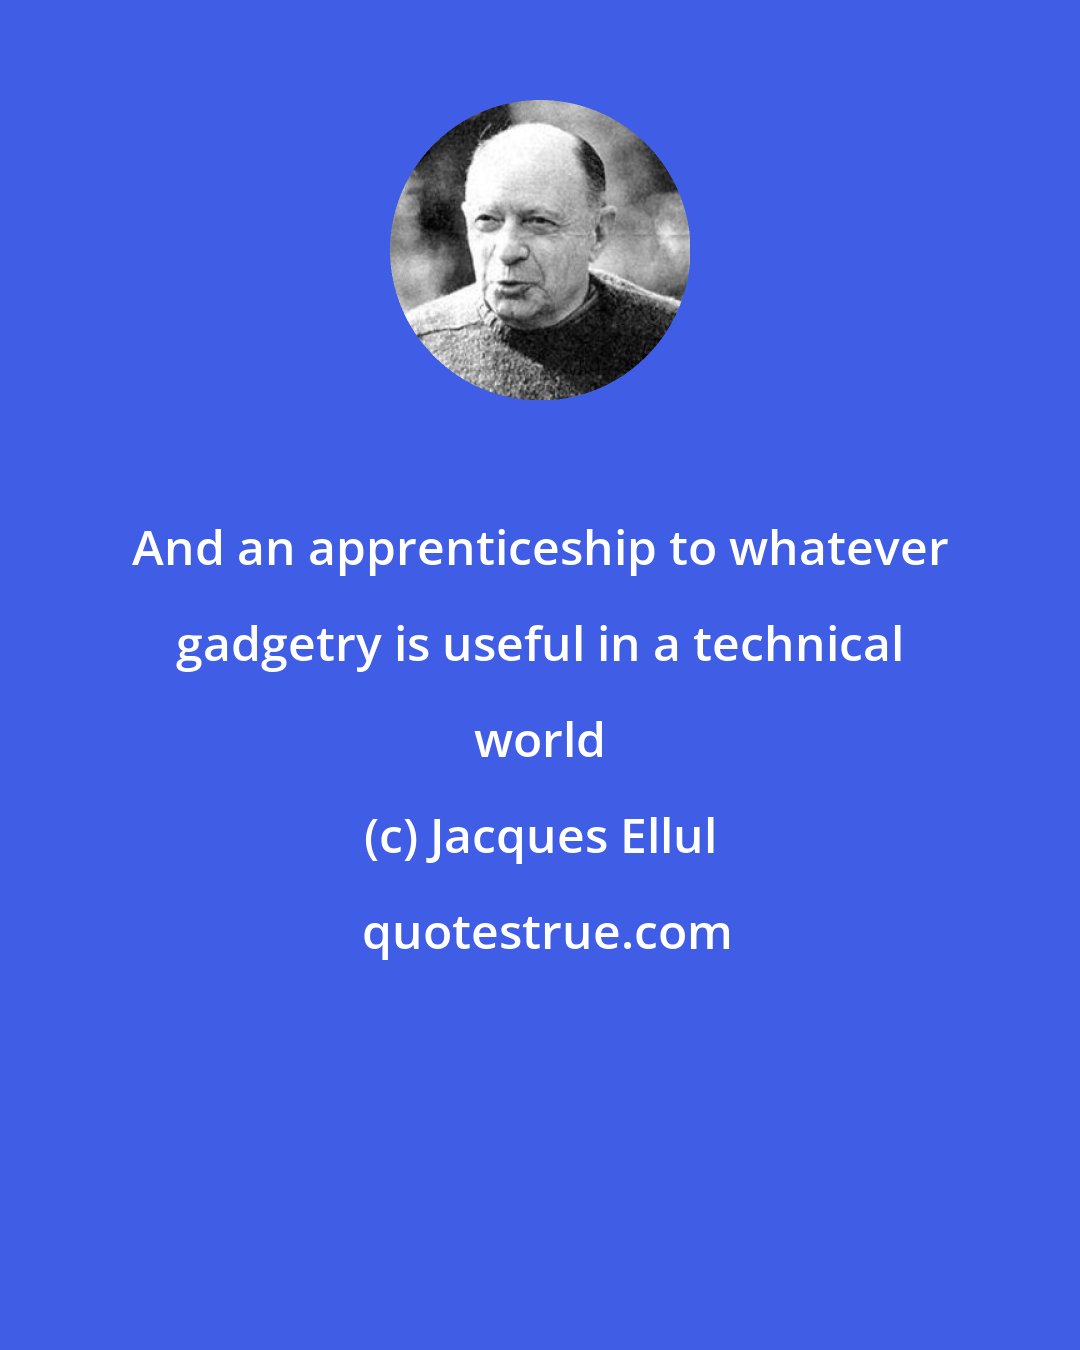 Jacques Ellul: And an apprenticeship to whatever gadgetry is useful in a technical world